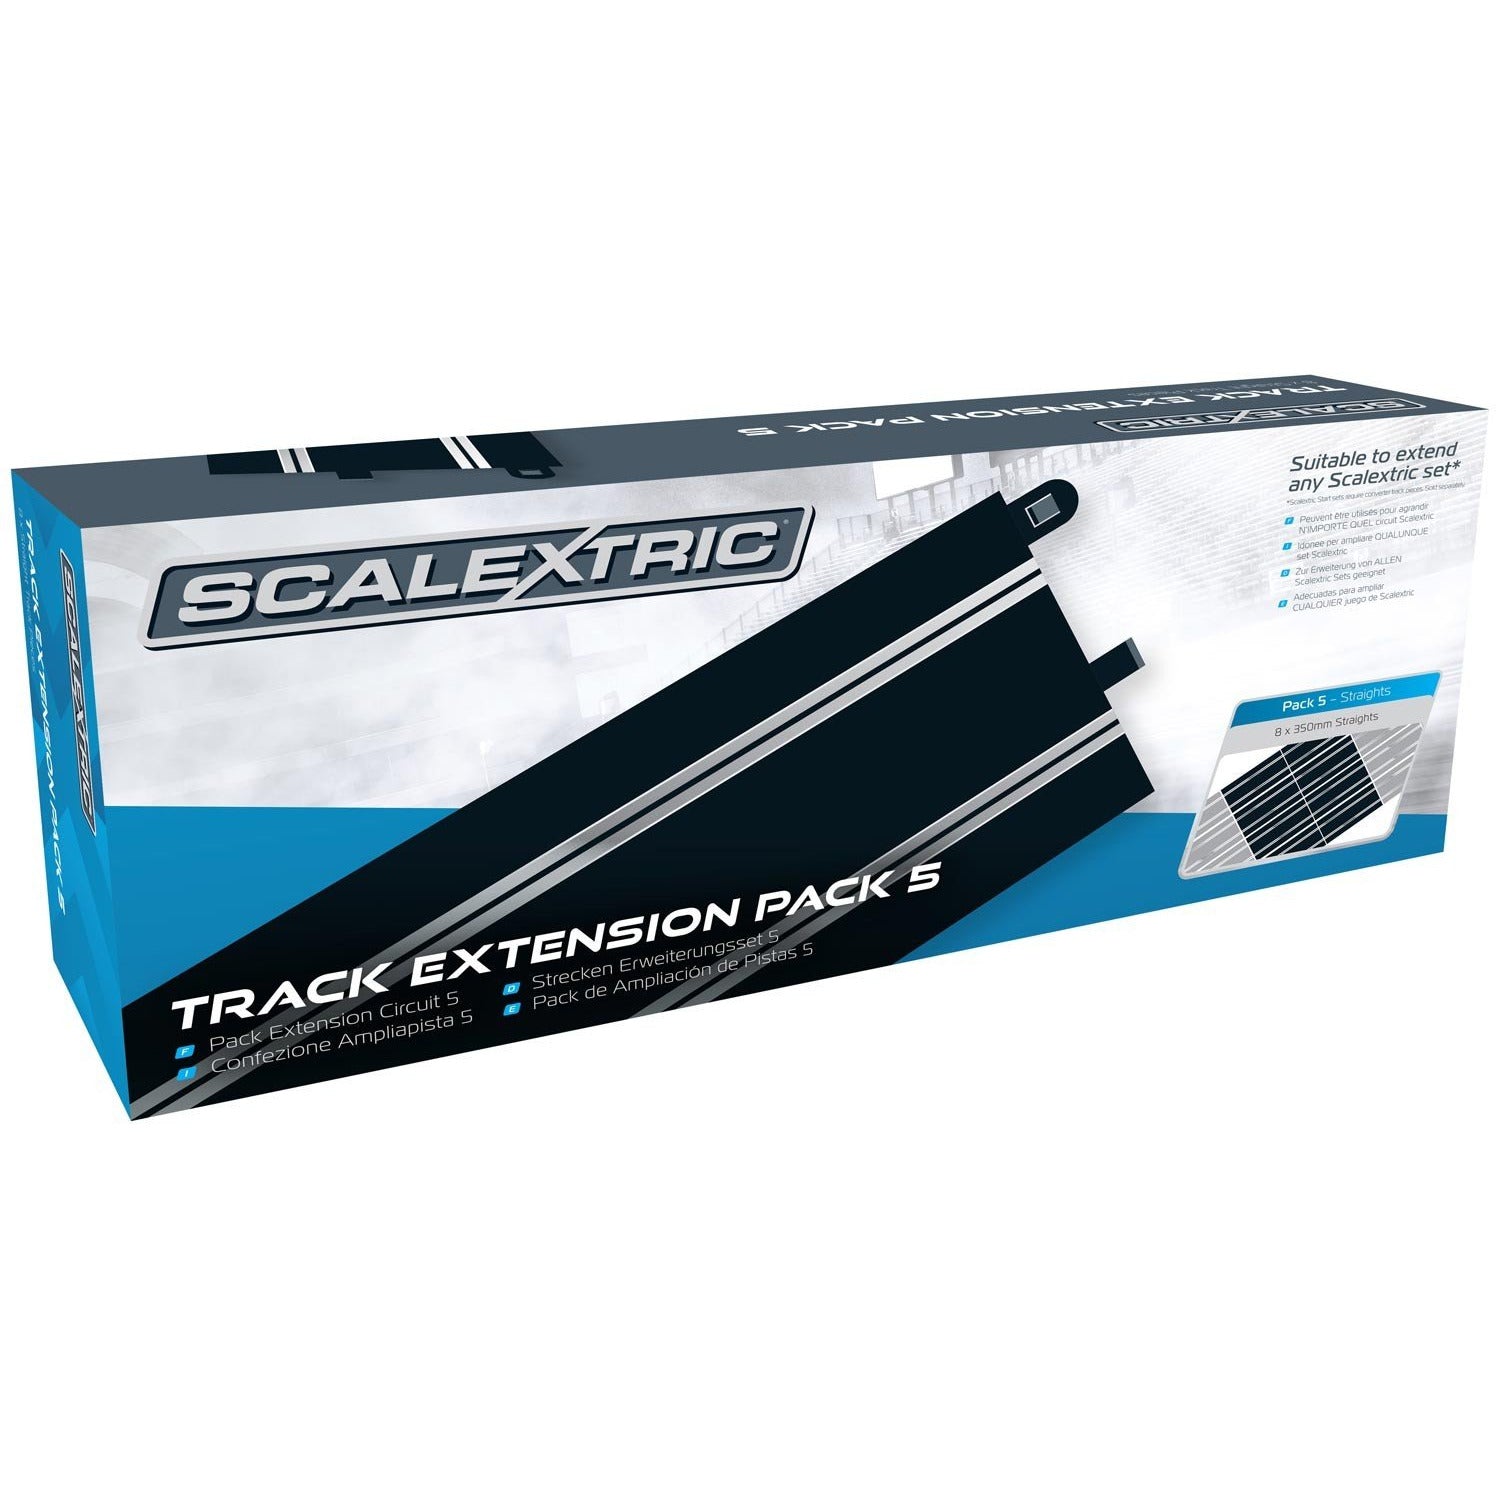 Track Extension Pack 5 350mm Straights 8 pcs